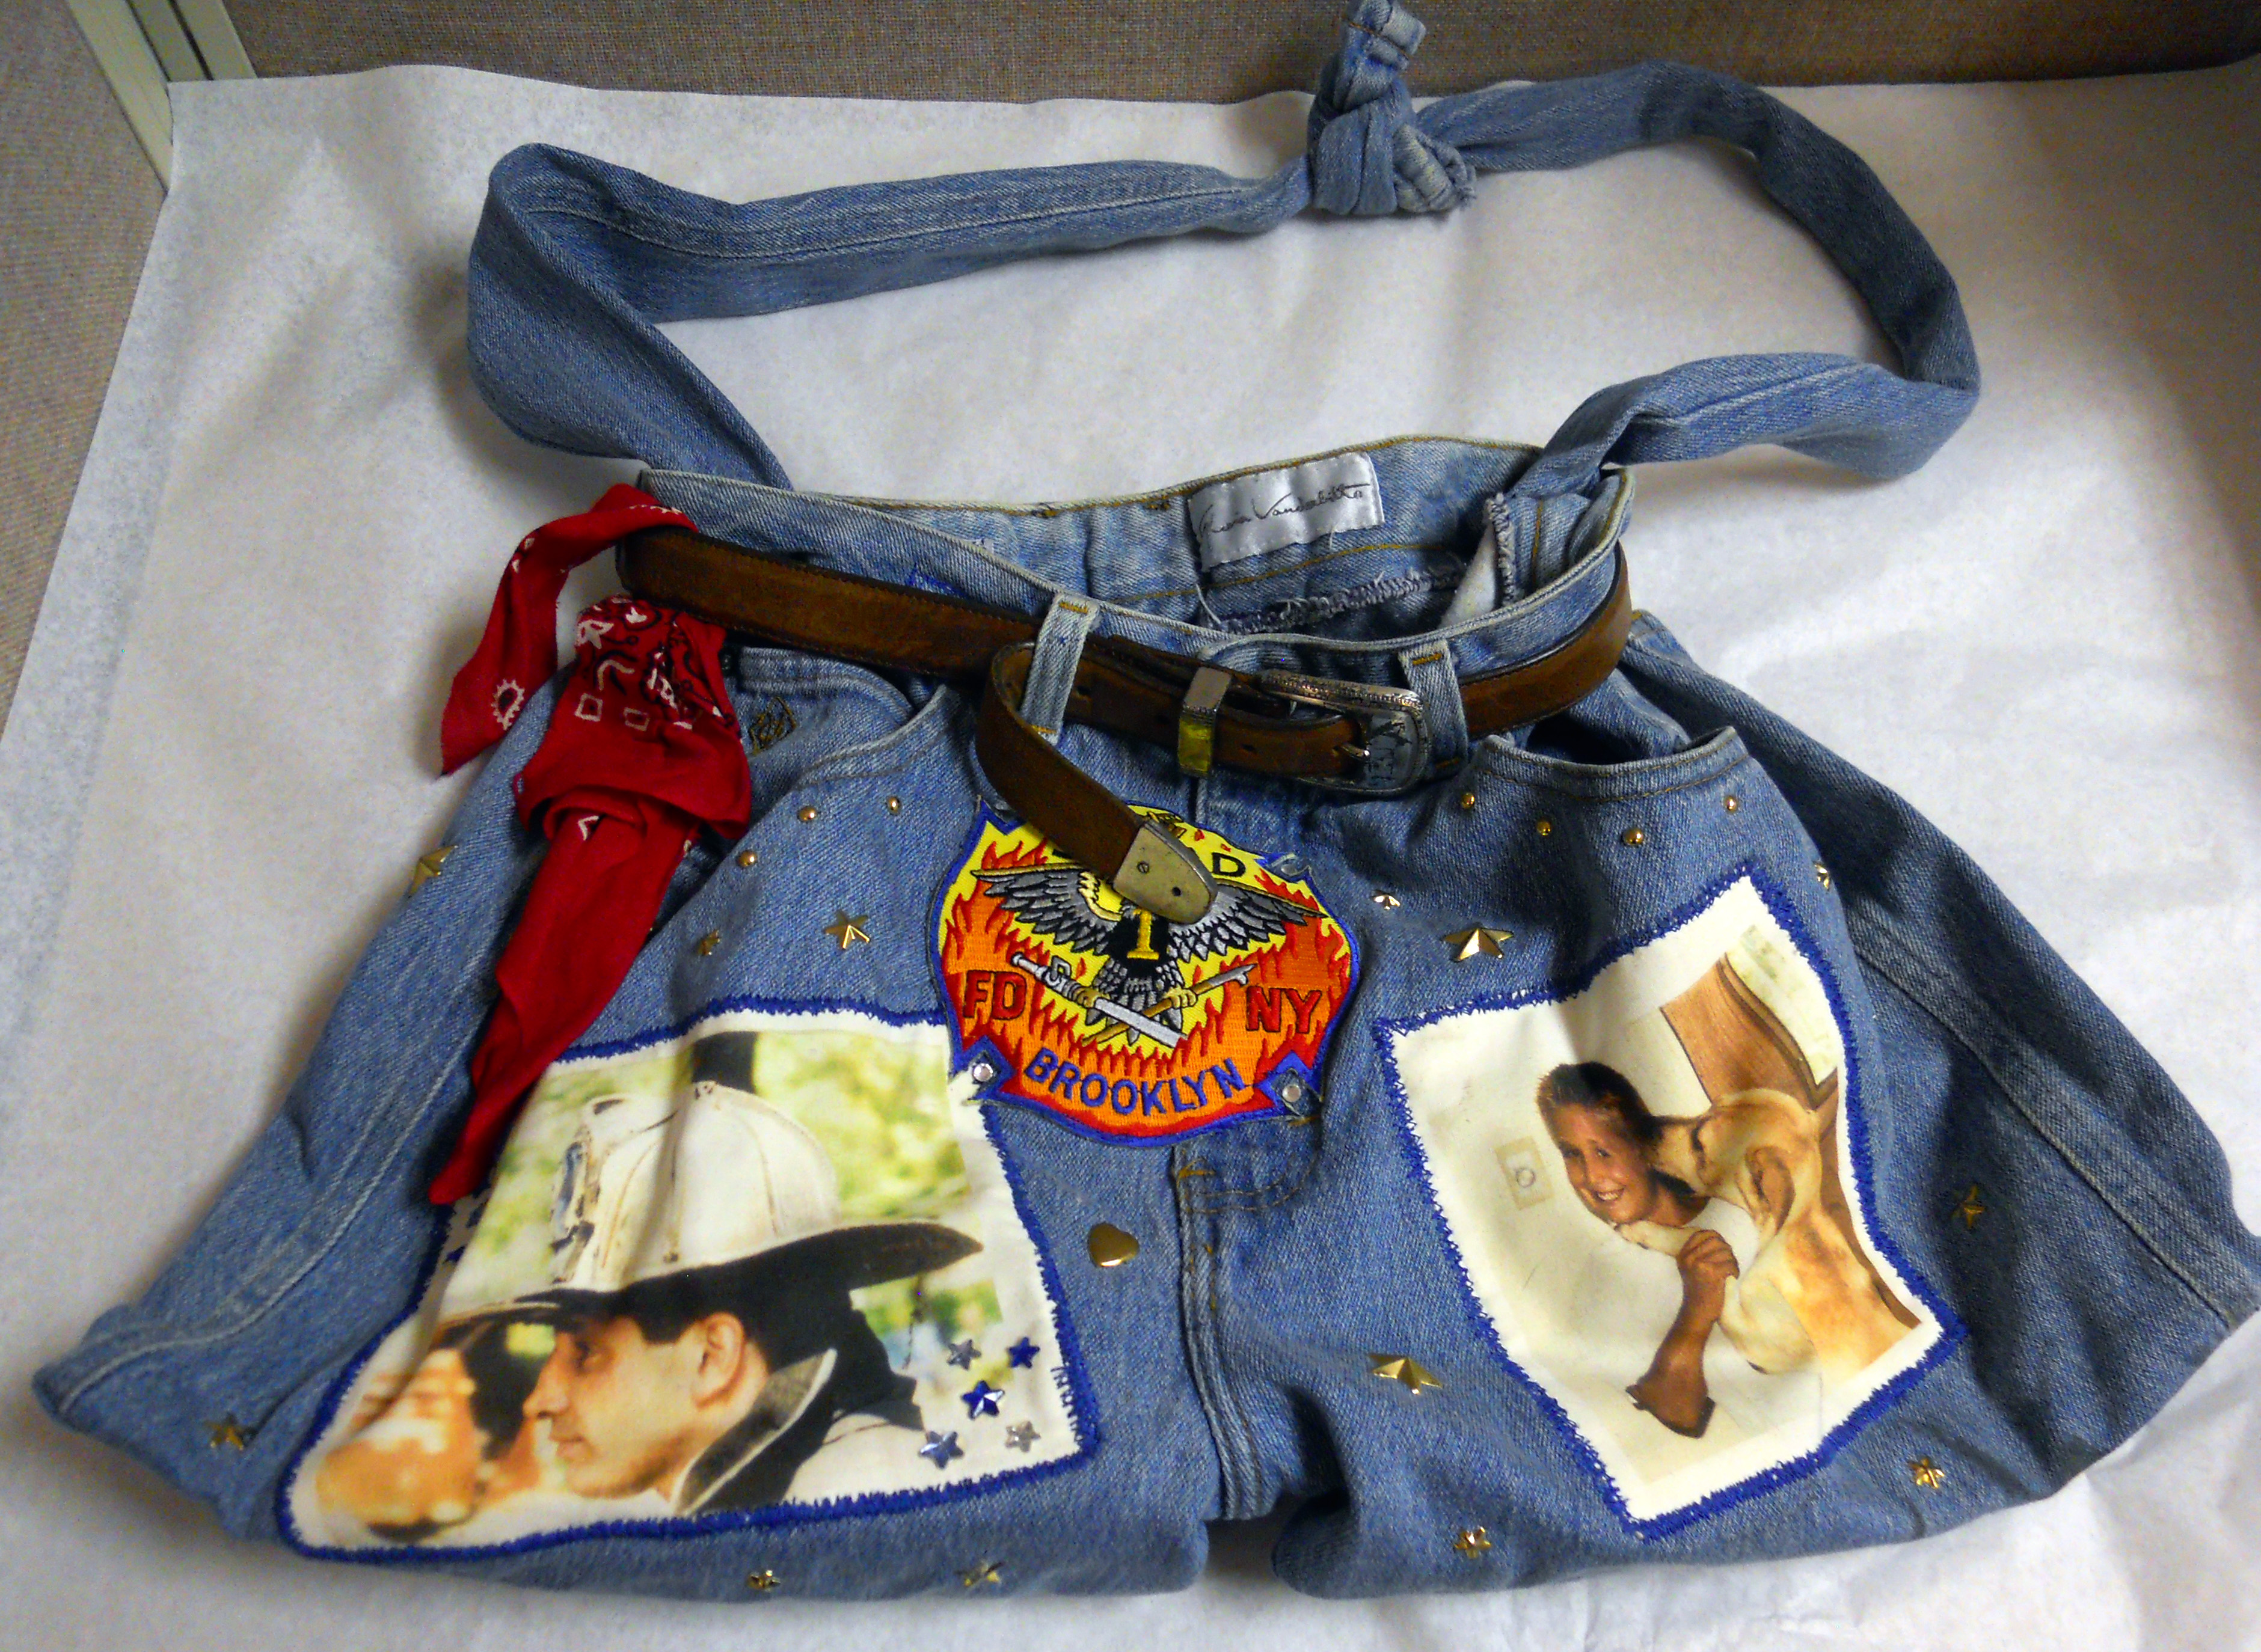 FDNY Lieutenant Michael A. Esposito is remembered on a bag made of blue jeans. The bag includes a photo of Esposito in uniform, as well as a fire patch and a photo of a young girl with a dog.